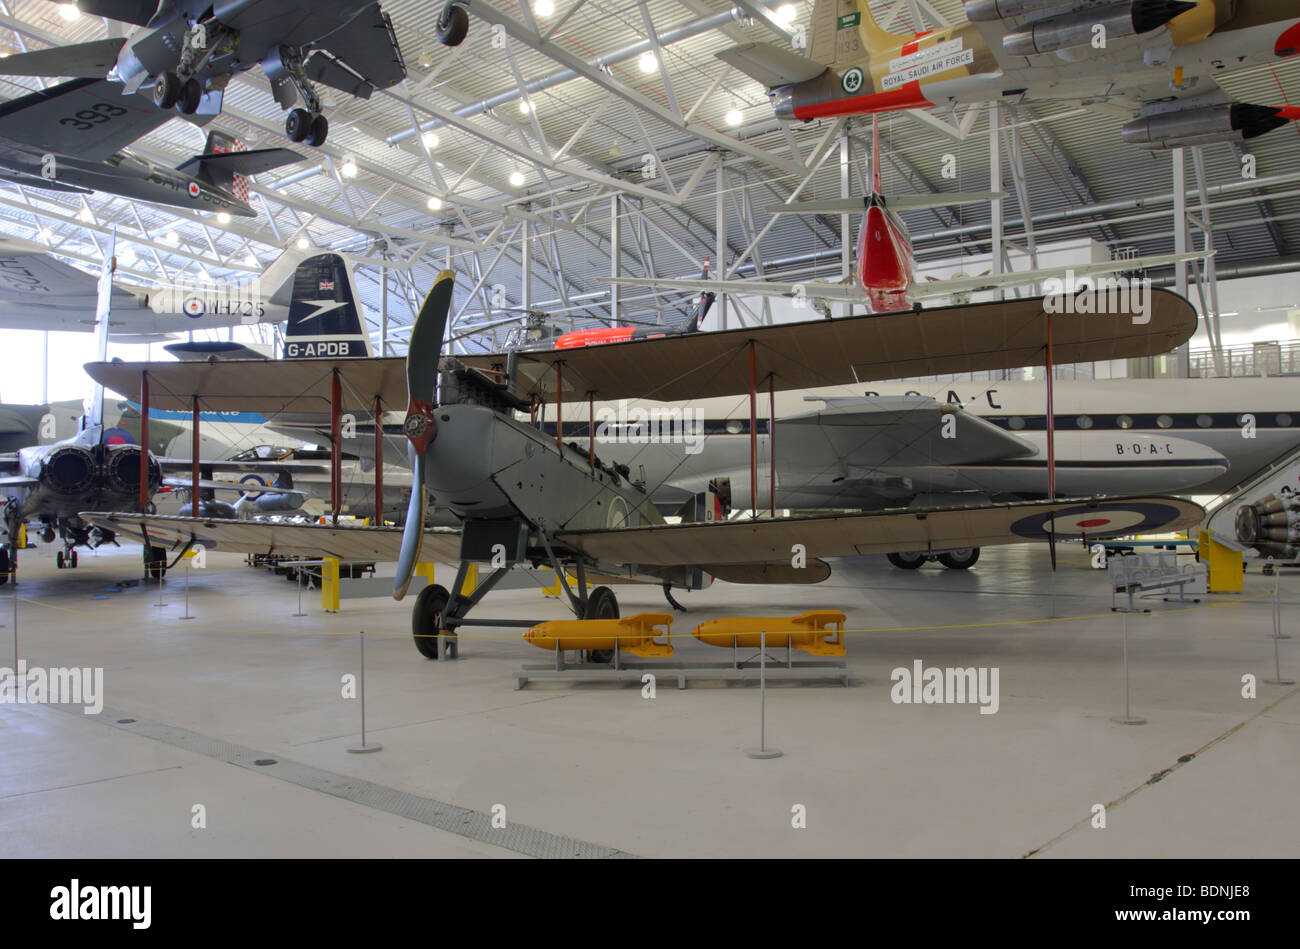 A fine example of the DeHavilland DH9 biplane,on permanent display in the Air Space Hangar,IWM Duxford. Stock Photo